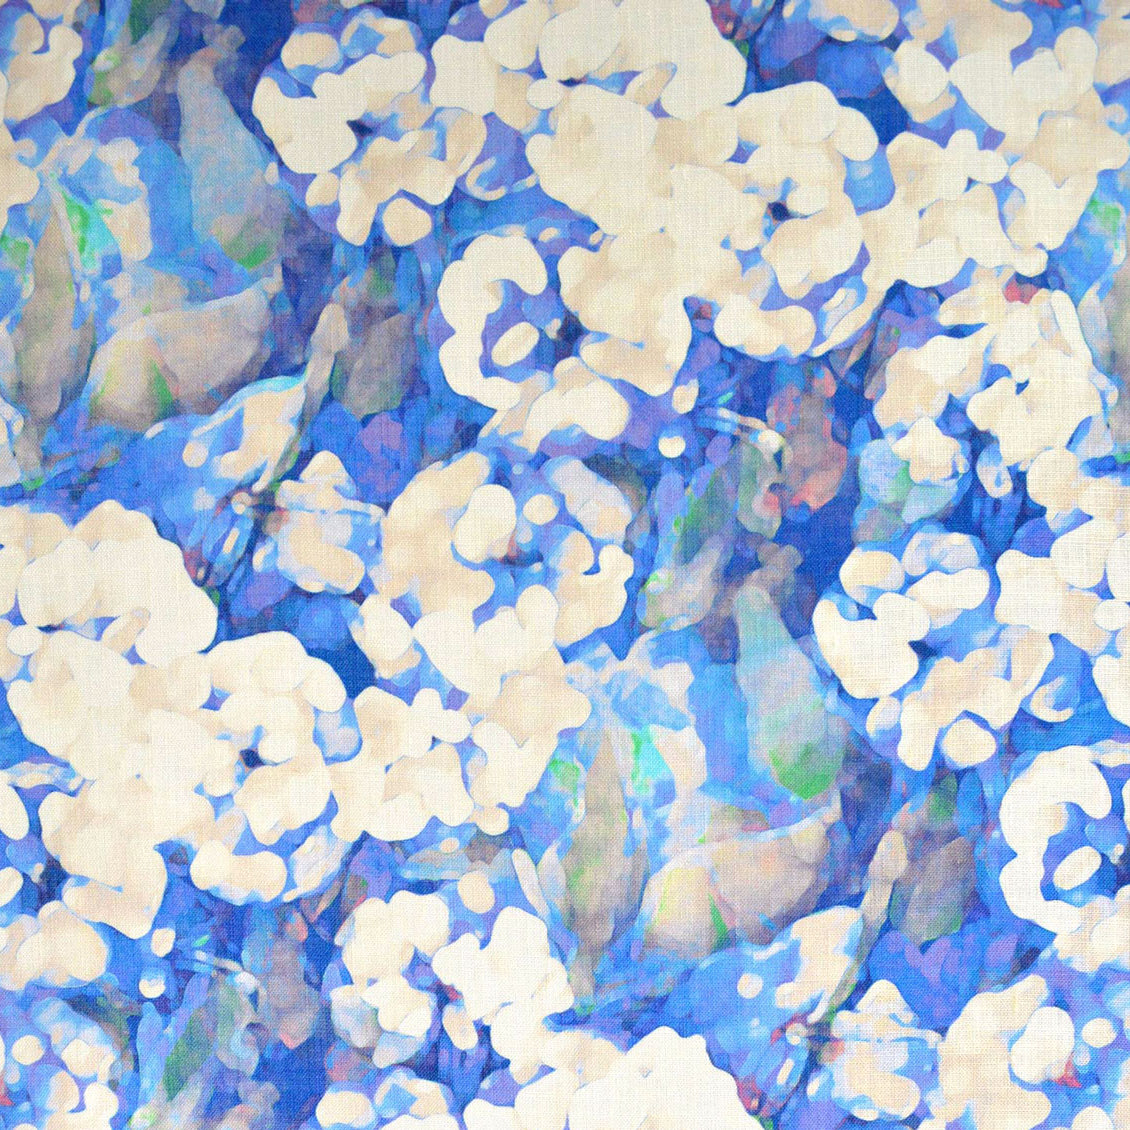 Detail of fabric in an abstract floral print in technicolor shades of blue, cream and green.